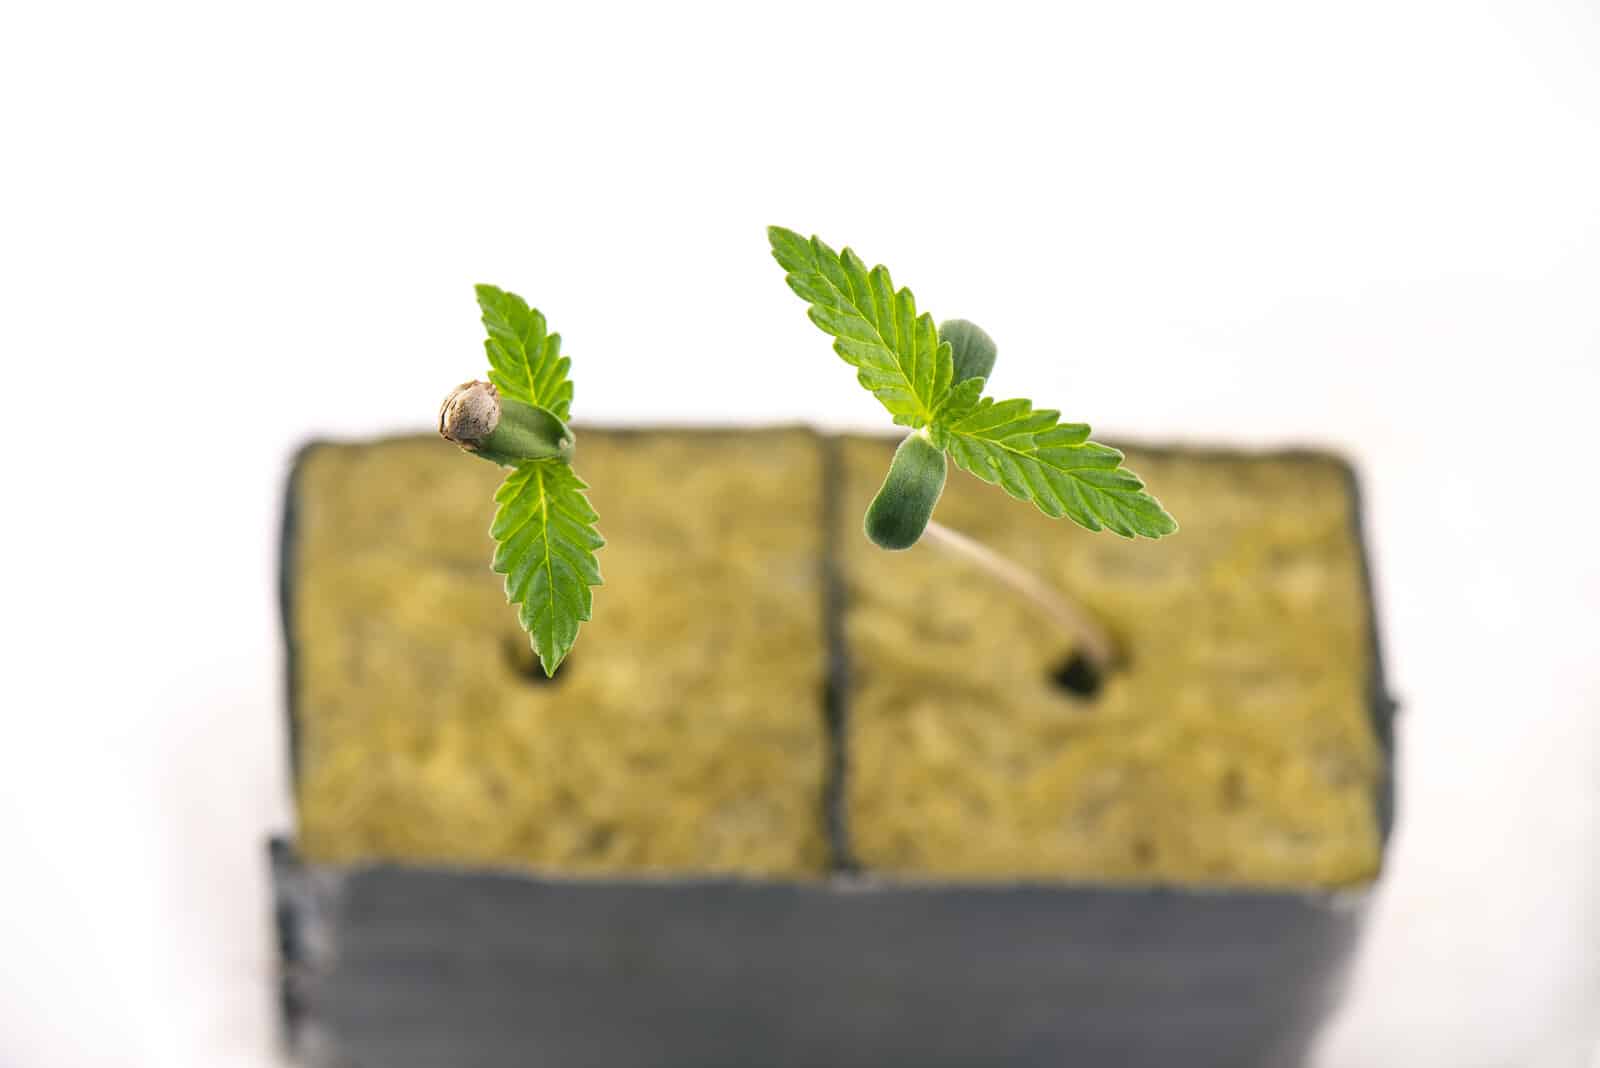 Cannabis Seedling Stage. Marijuana Plant Growth Cycle Stages.